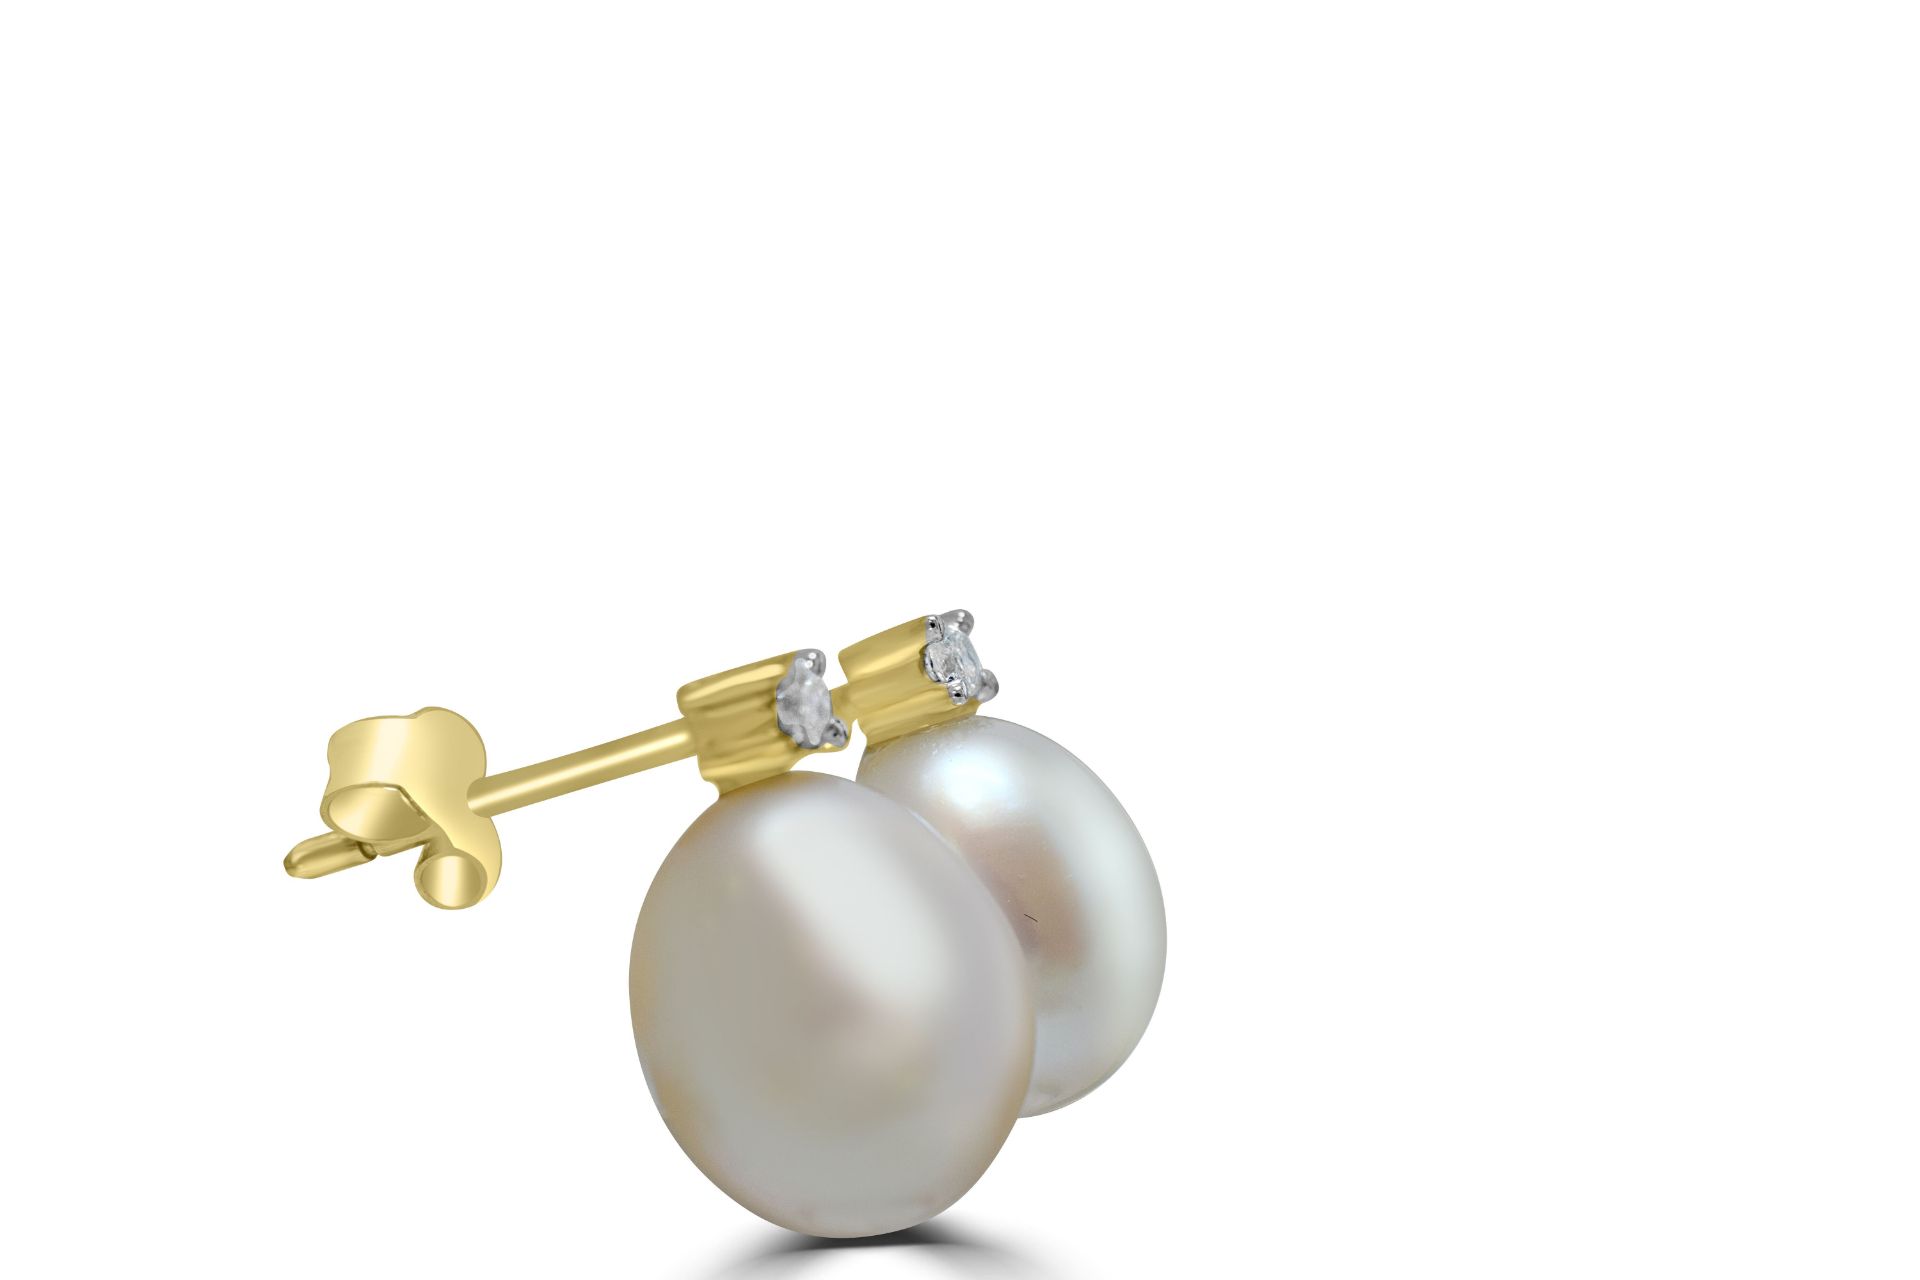 Pearl and Diamond Earrings in Yellow Gold - Image 3 of 4